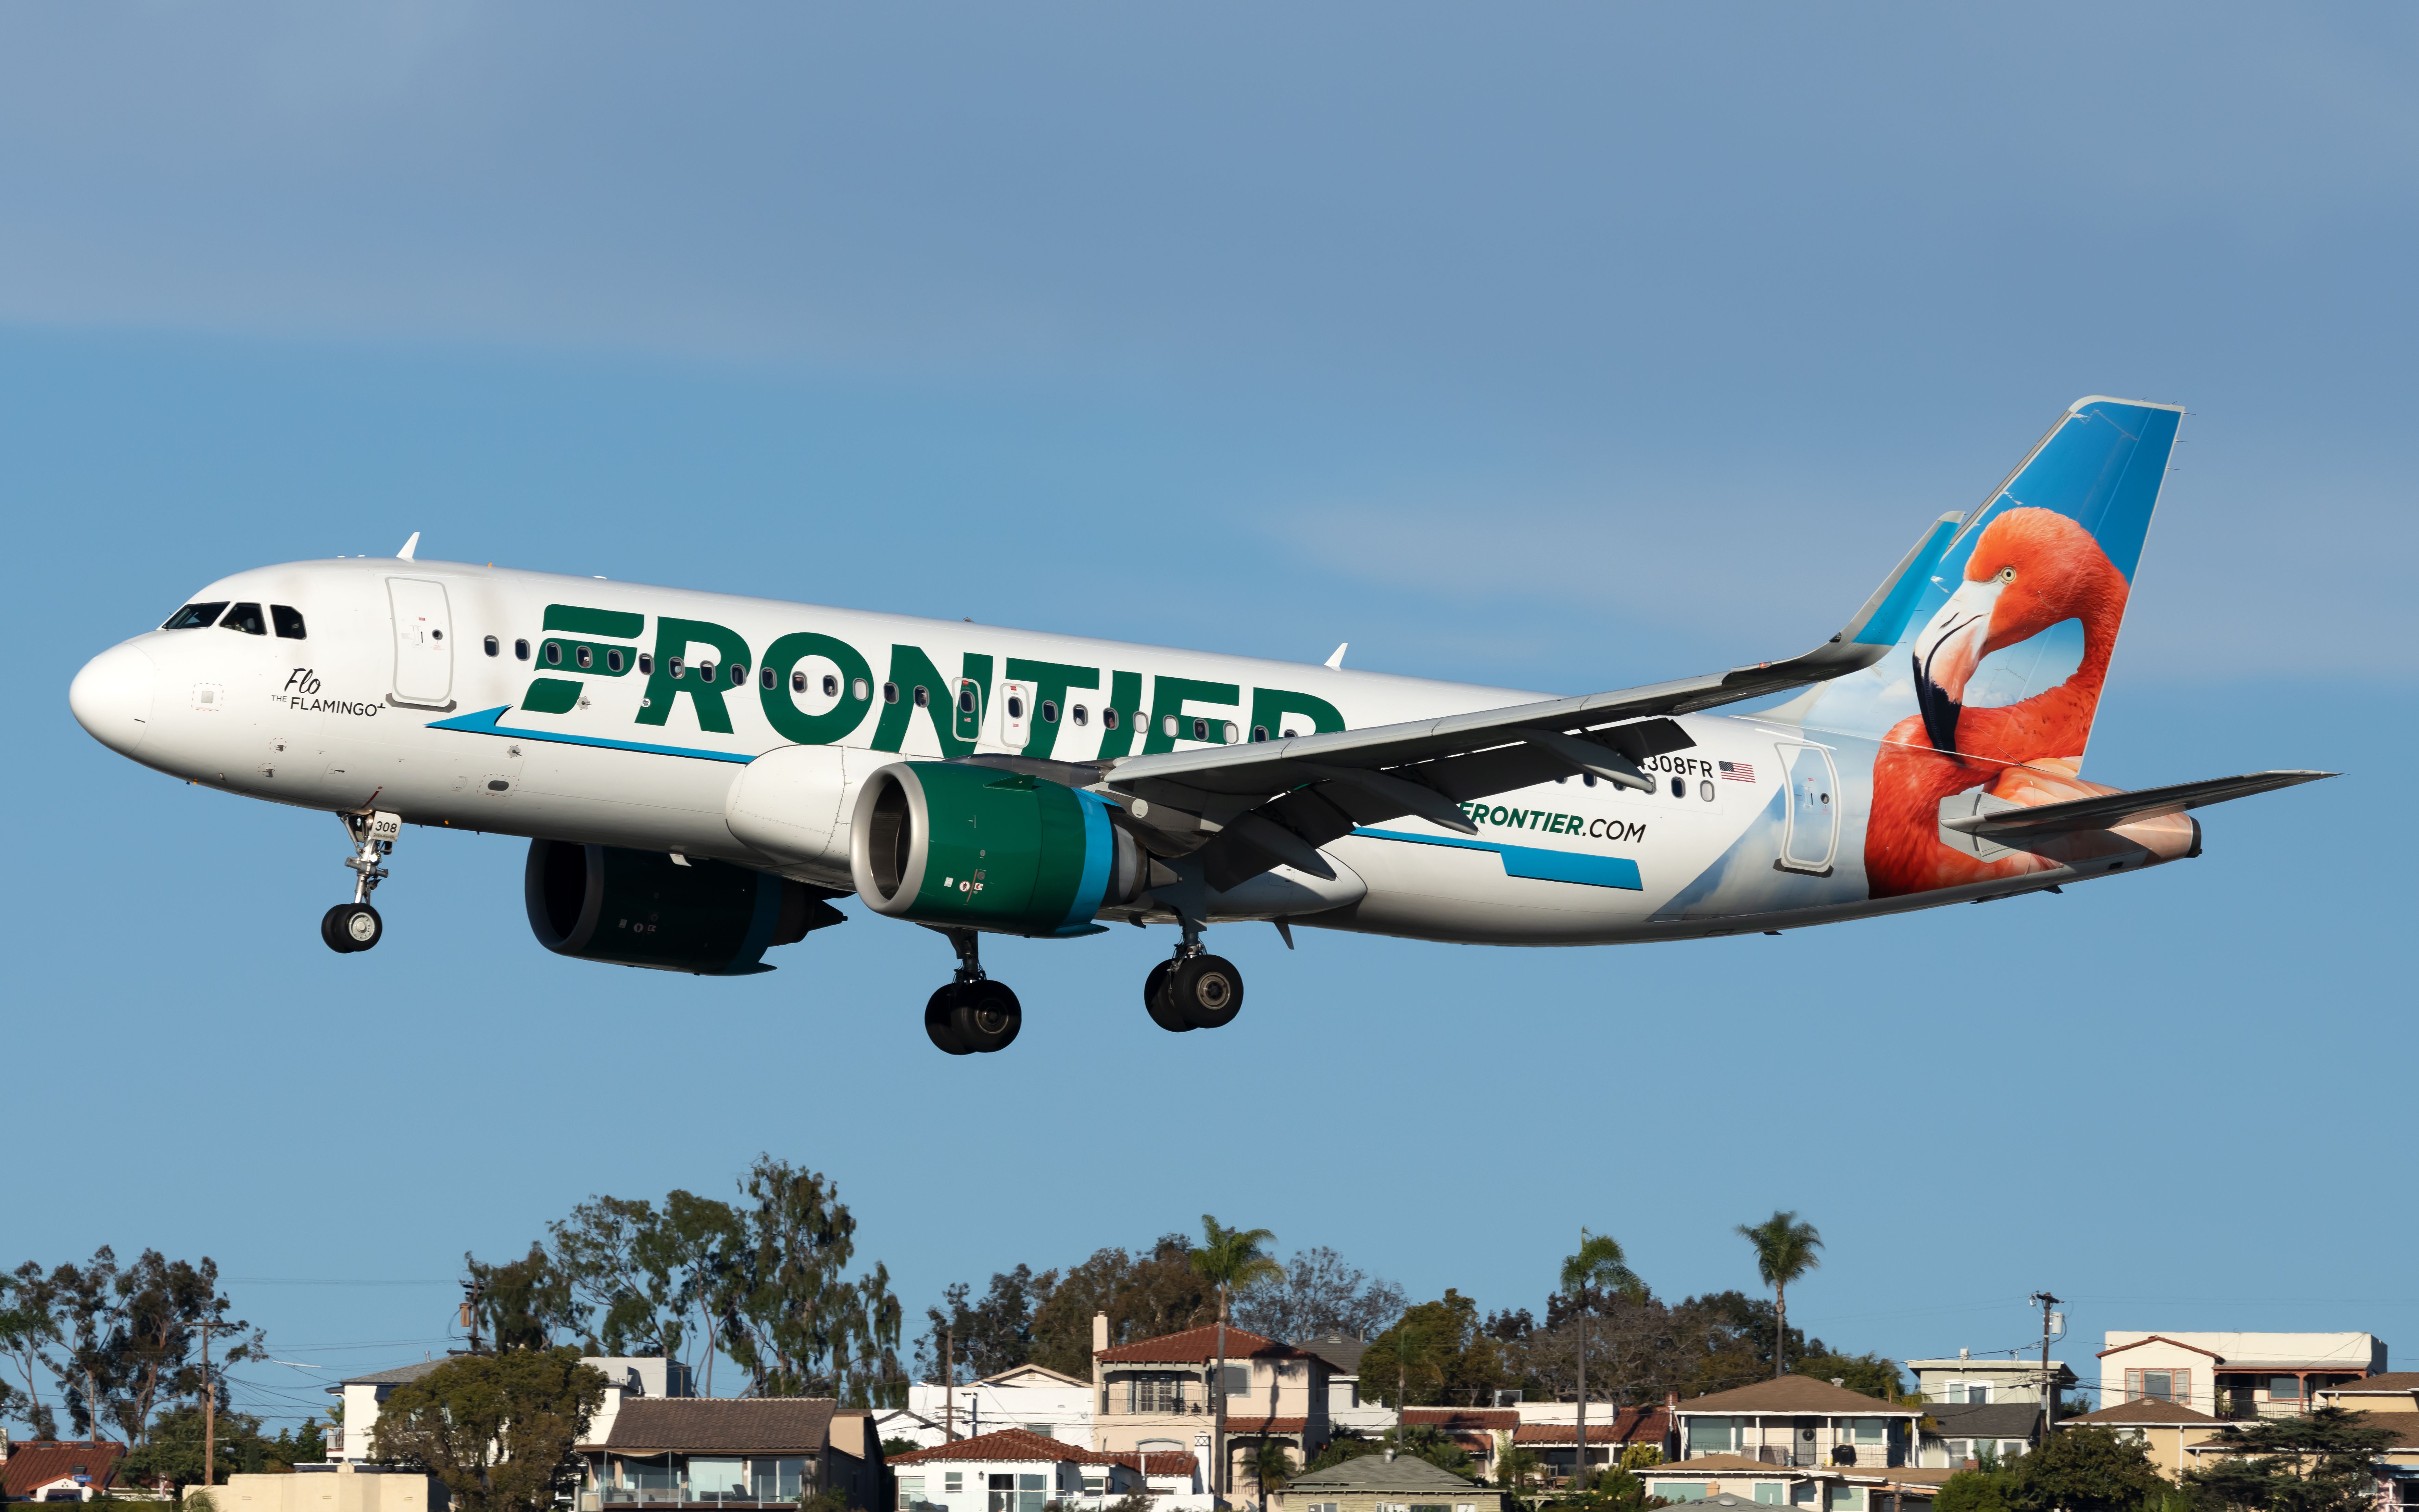 Frontier Airbus A320neo landing